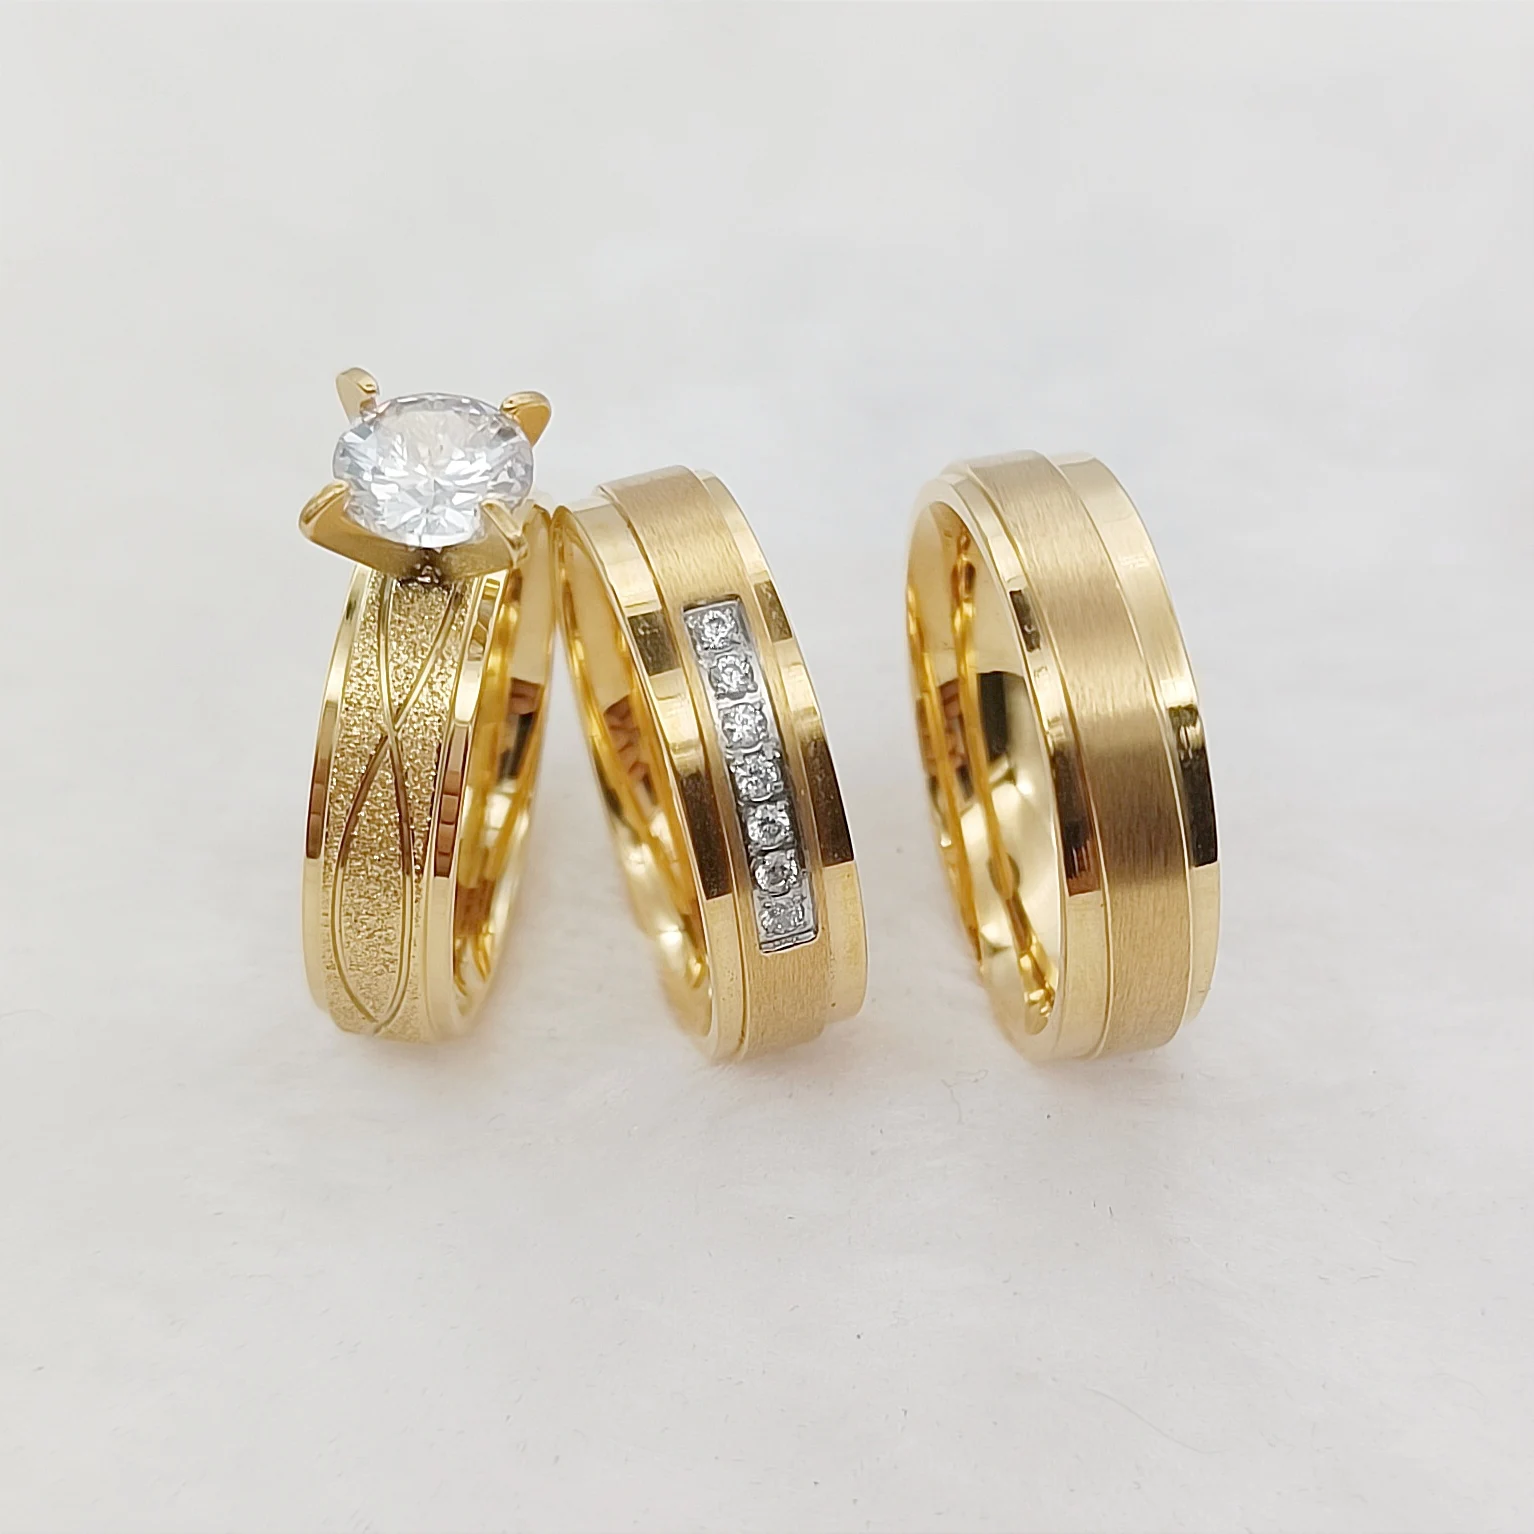 

Affordable Proposal Bridal Sets 24k Gold Plated Stainless Steel Jewelry 3pcs Marriage Wedding Engagement Rings For Couples